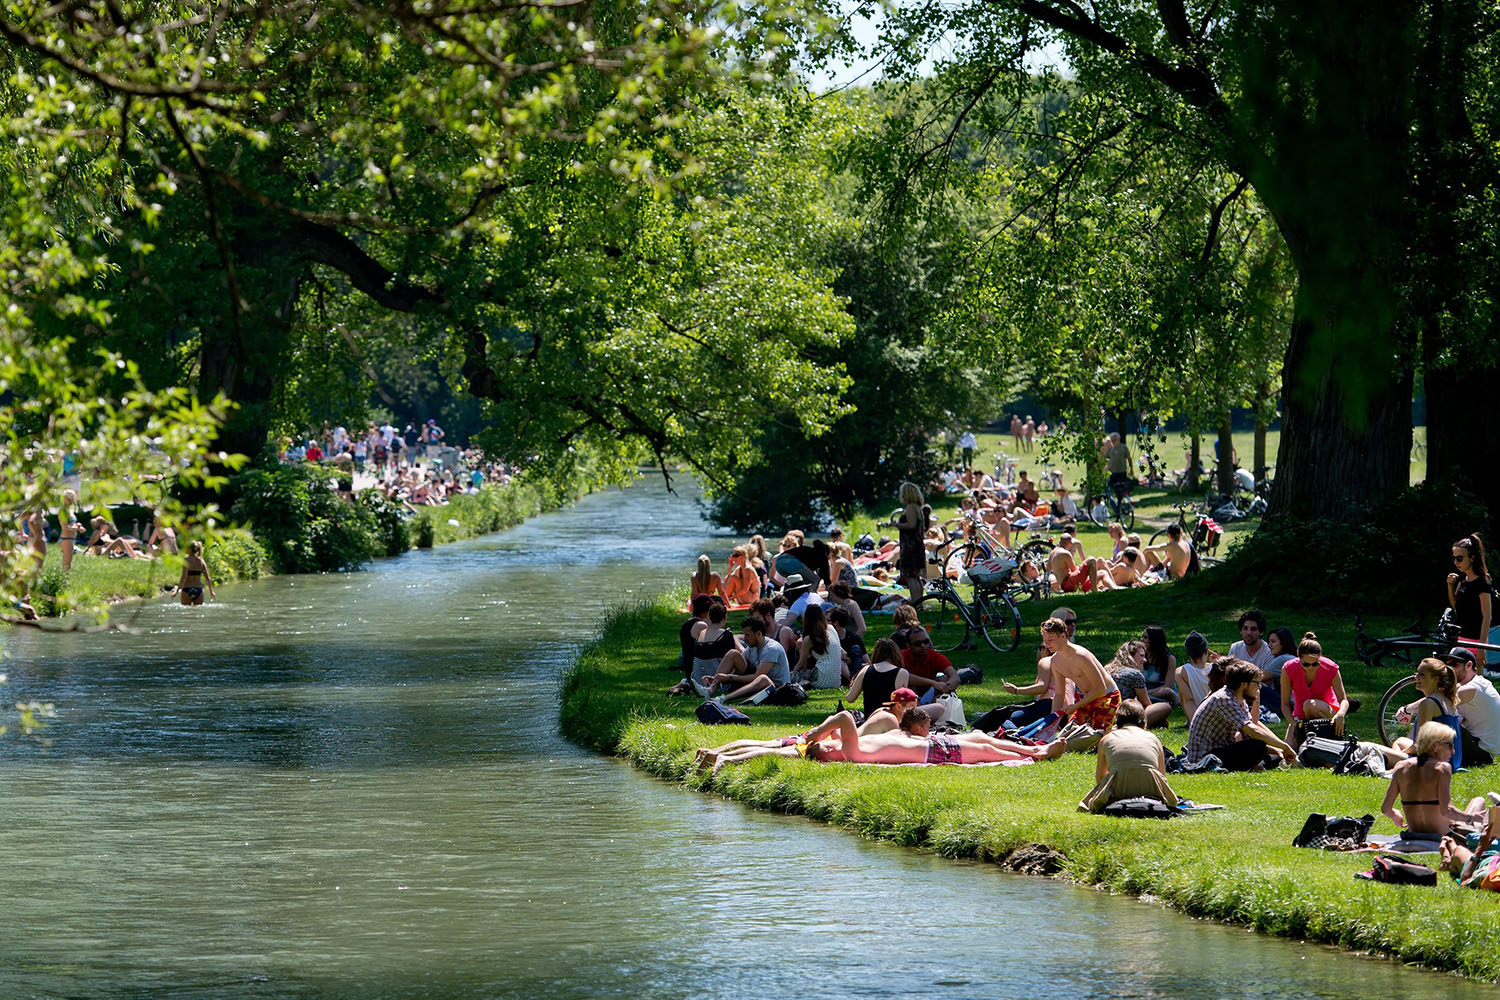 People enjoy the warm weather in the English Gardens in Munich, on May 21, 2014.